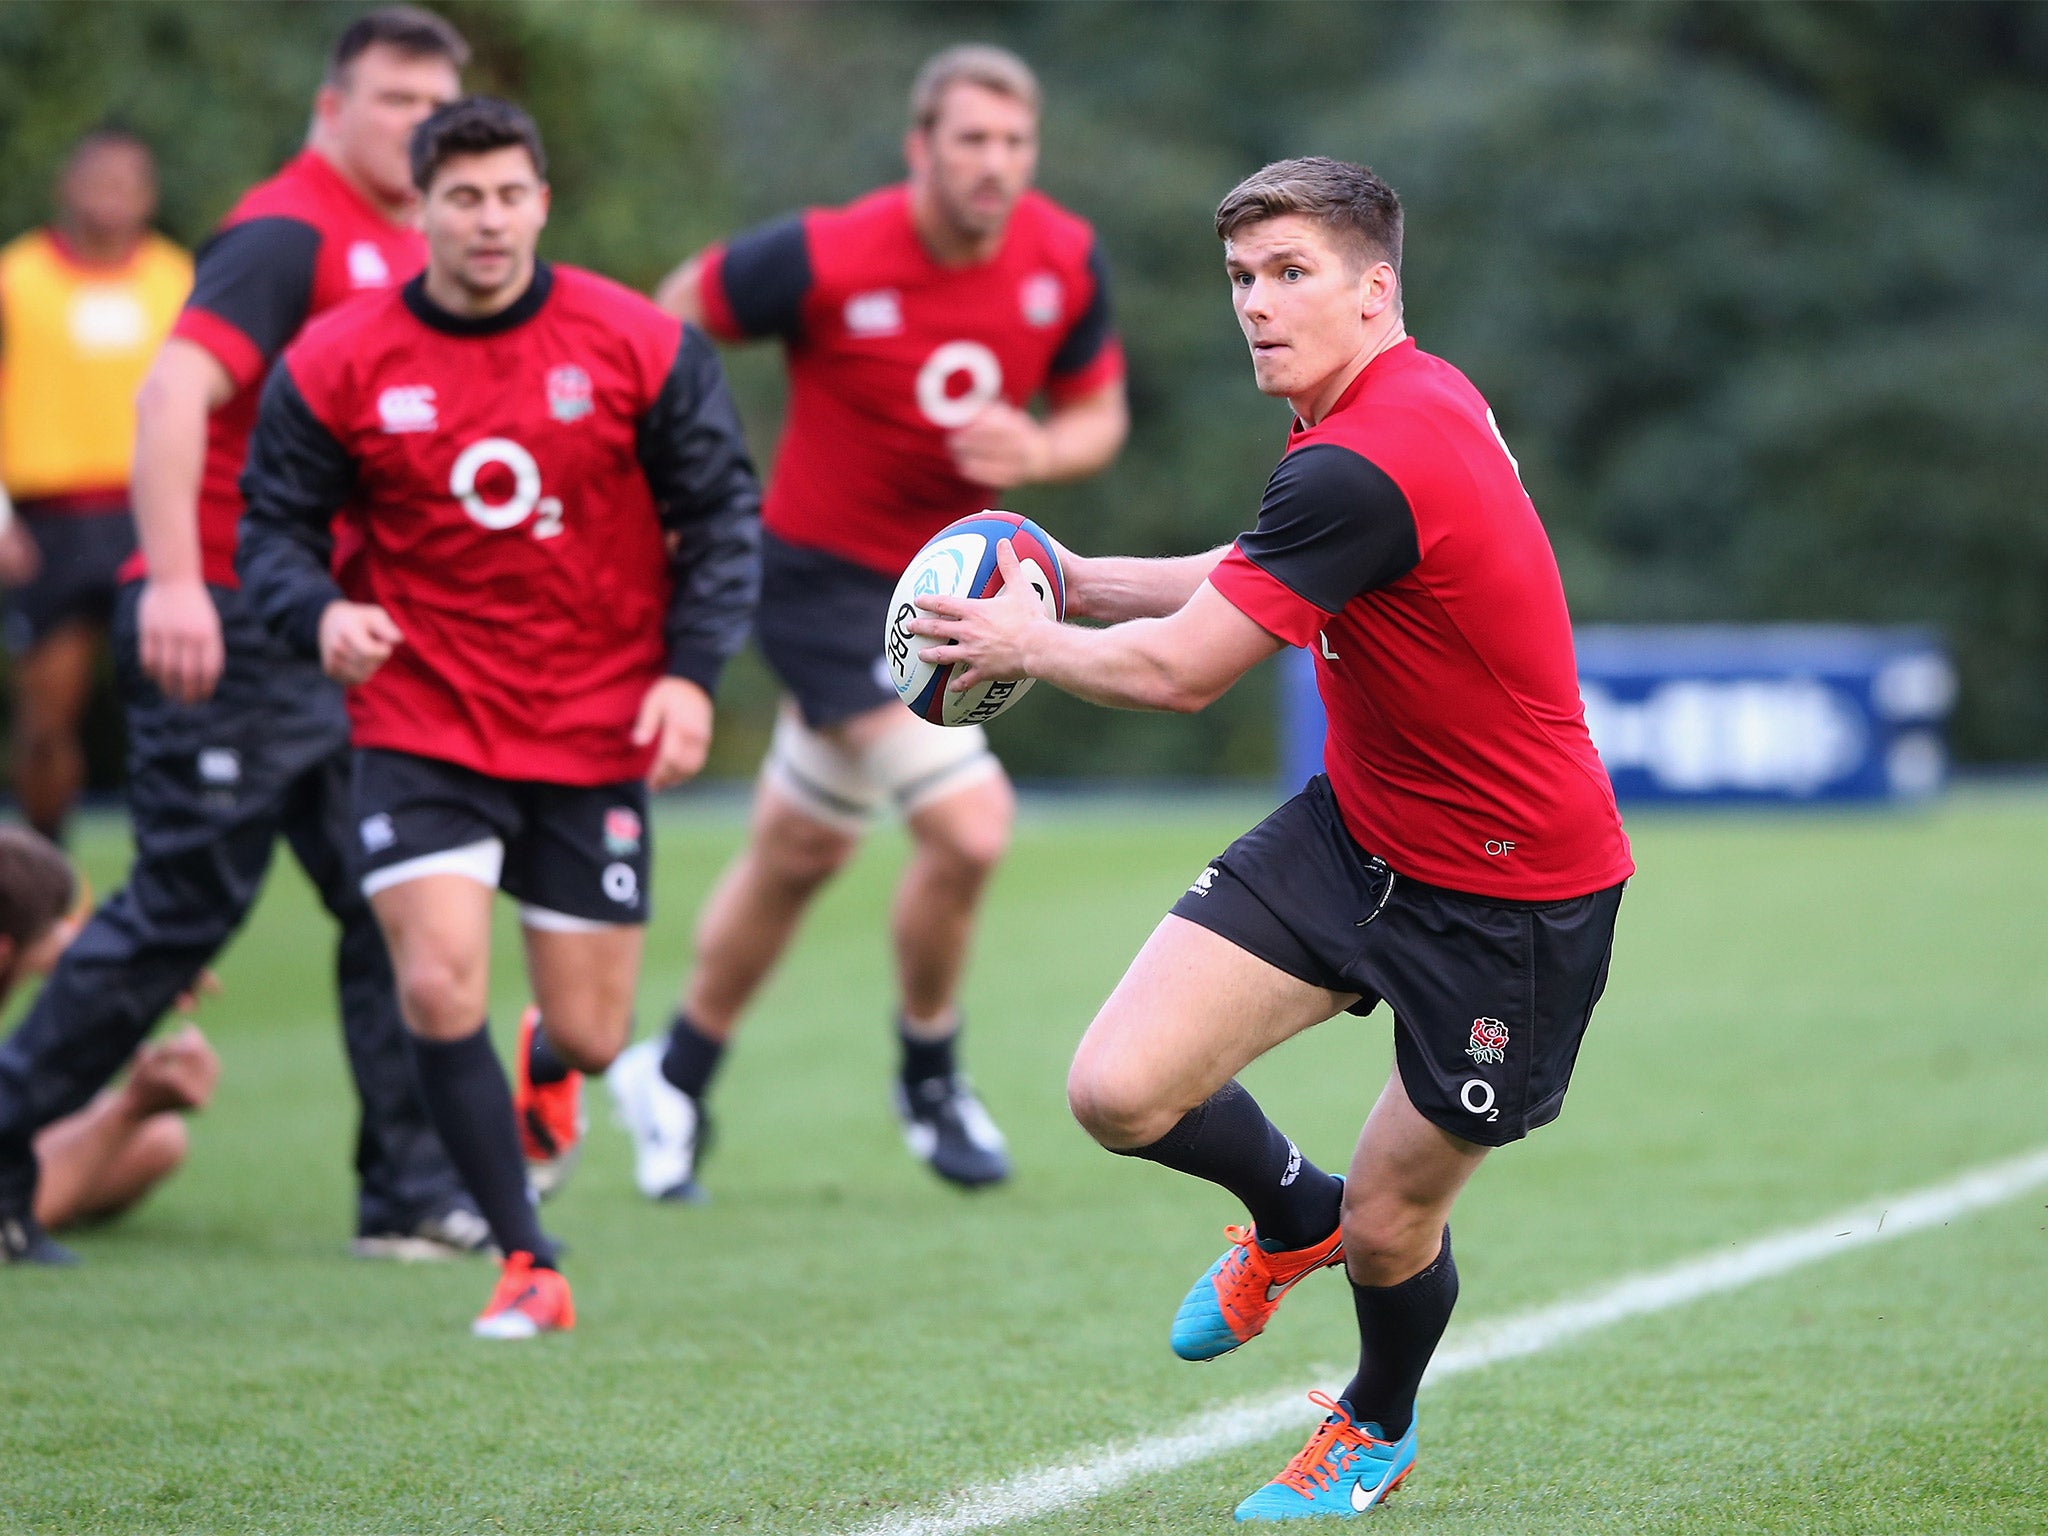 Owen Farrell may find himself playing at inside centre after an unimpressive display at fly-half against the Springboks last Saturday